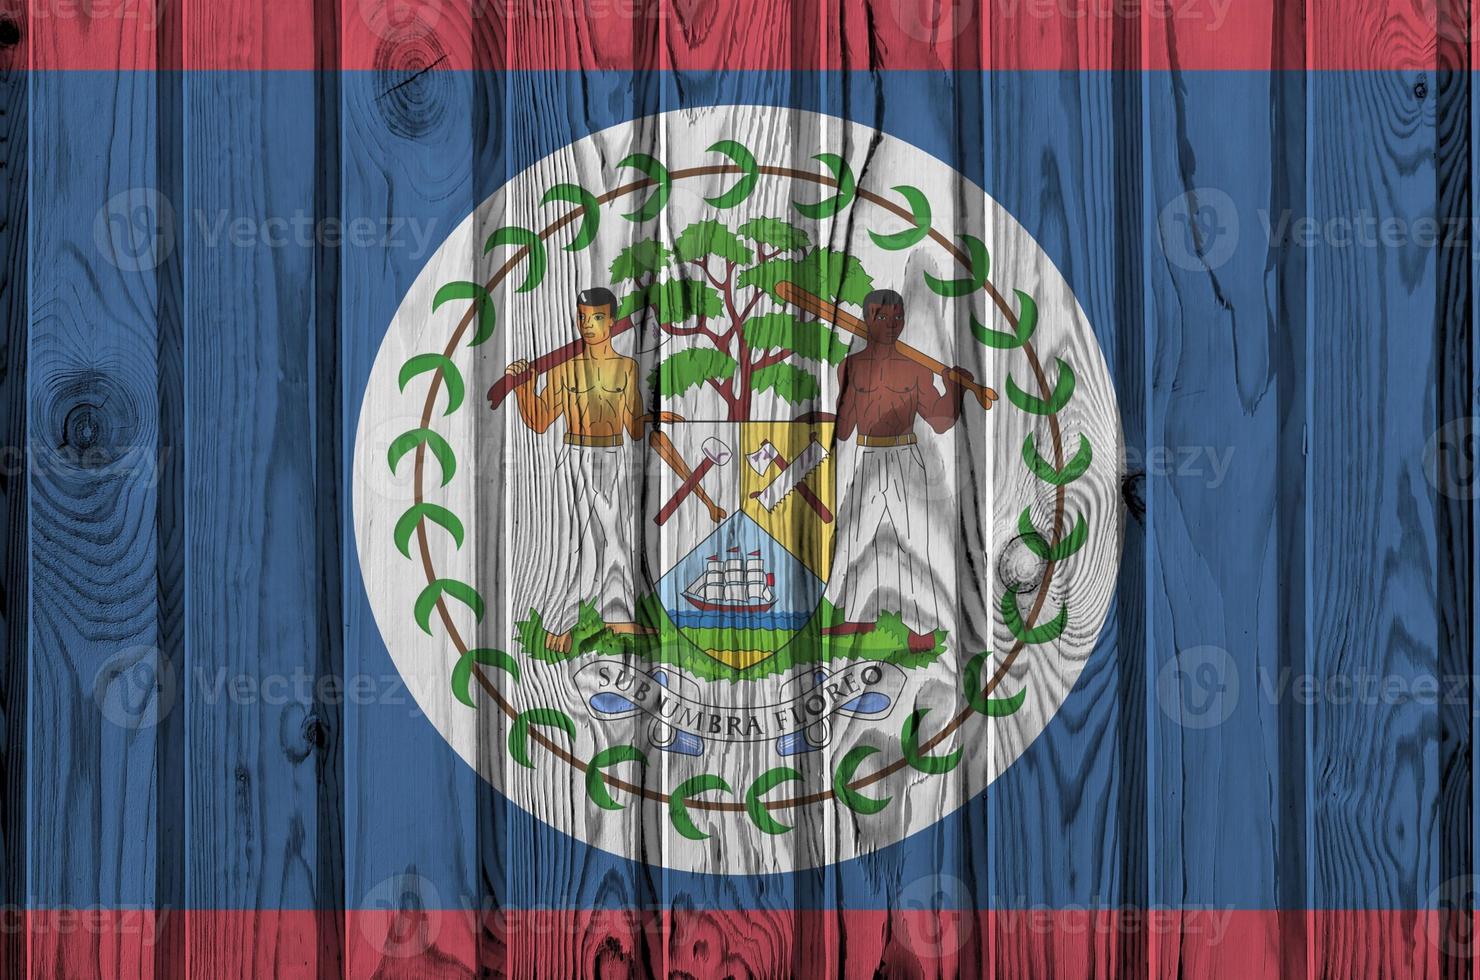 Belize flag depicted in bright paint colors on old wooden wall. Textured banner on rough background photo